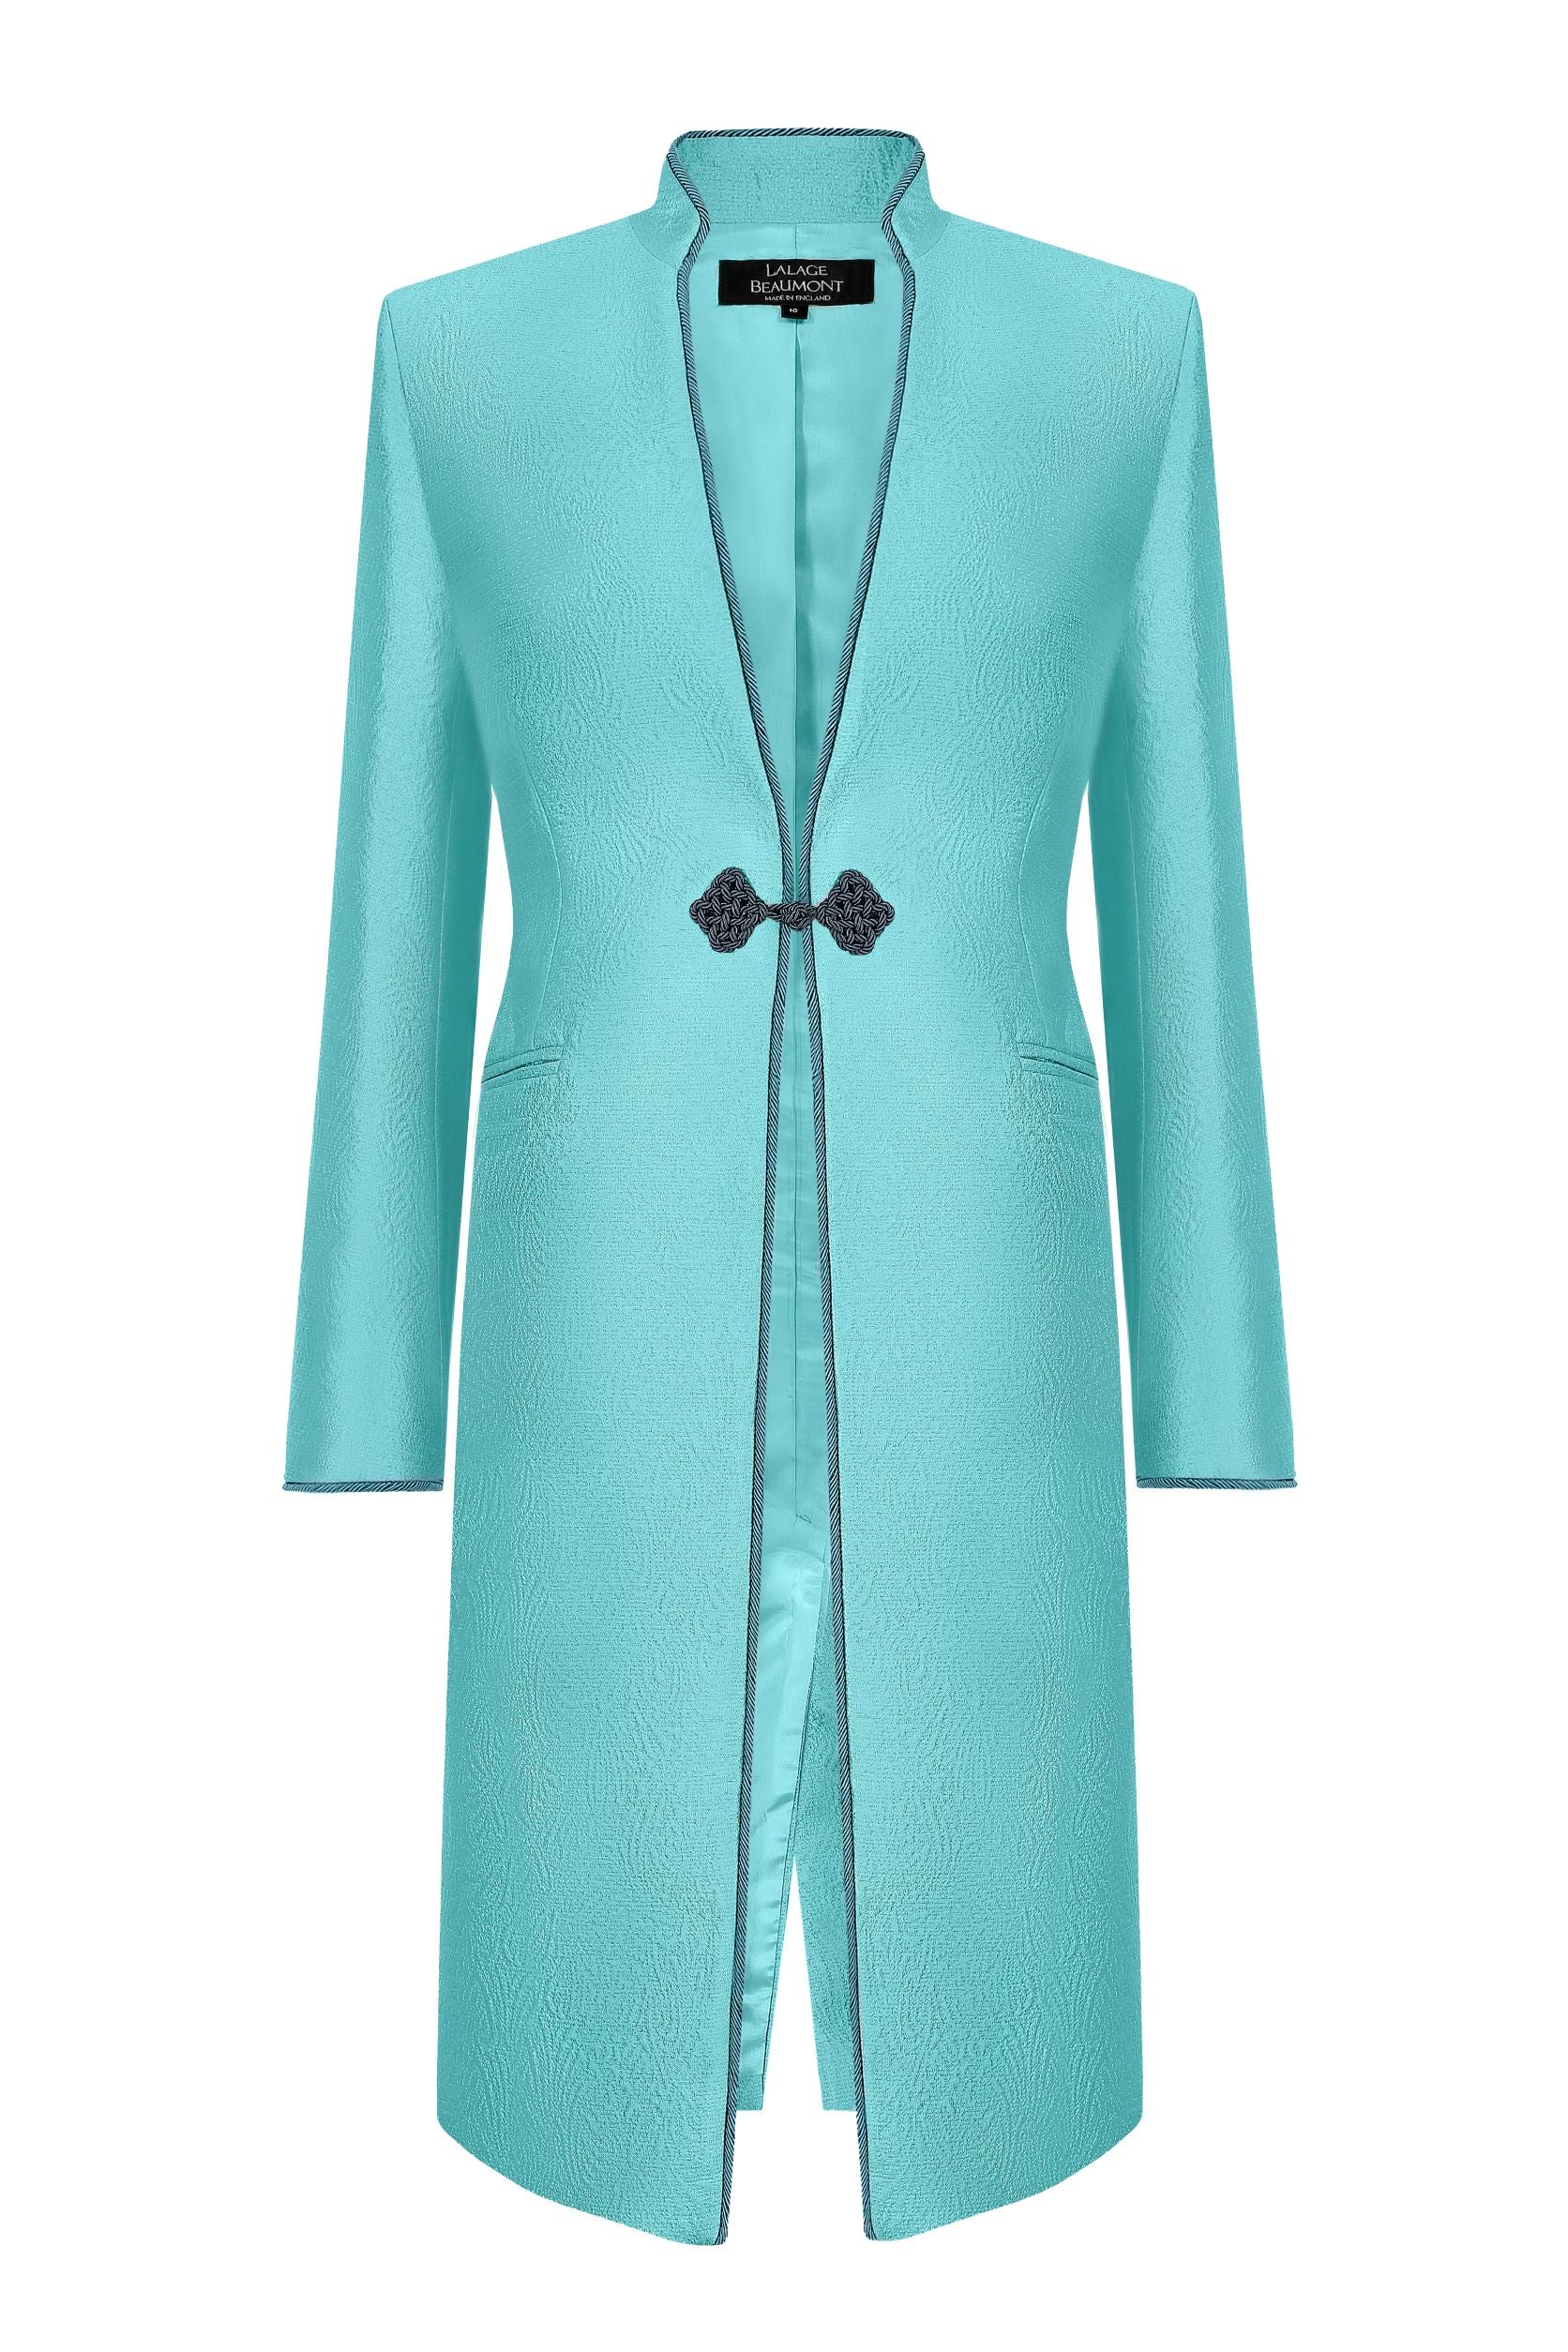 Dress Coats for Women, Dress and Coat Outfits